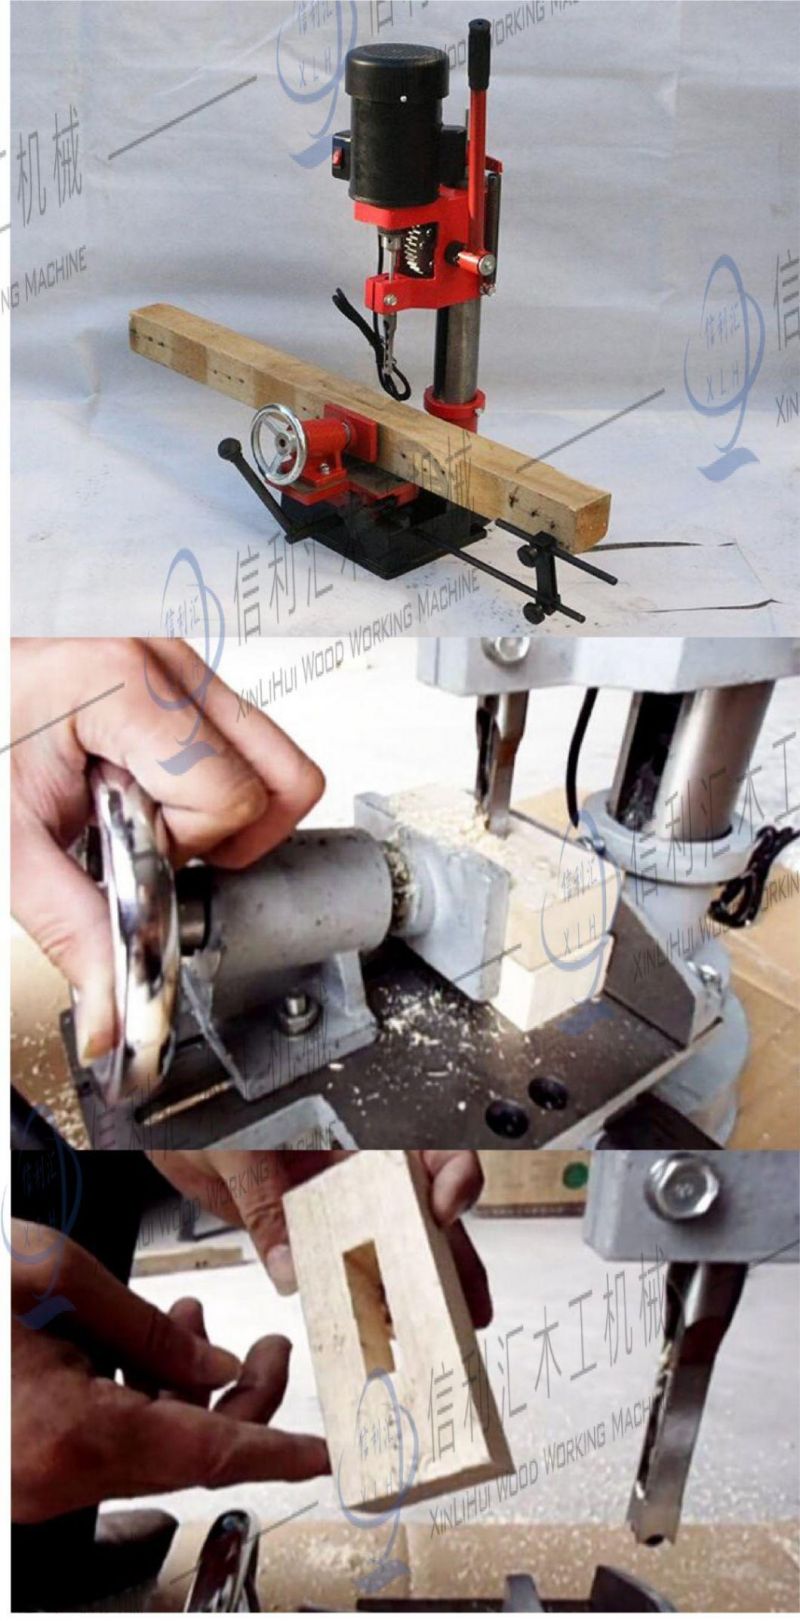 Mortising Machine for Various Types of Holes for Sharpener and Tool Shop Drilling Rig, Machinery Work Wood Industrial Workshop Hand Tools